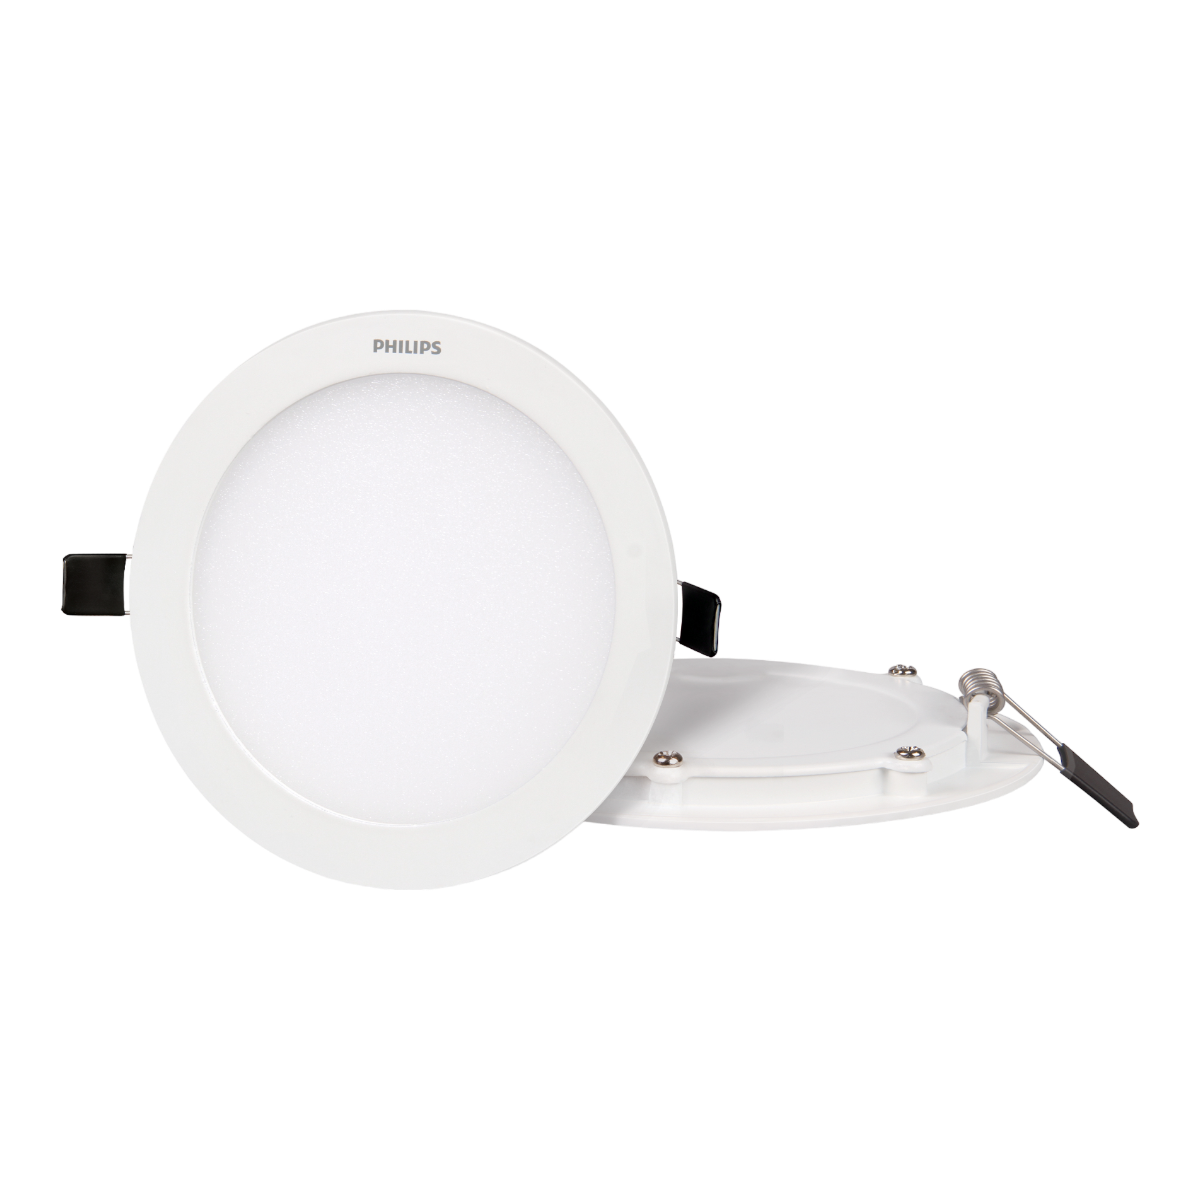 Philips Astra Max Plus LED Downlight